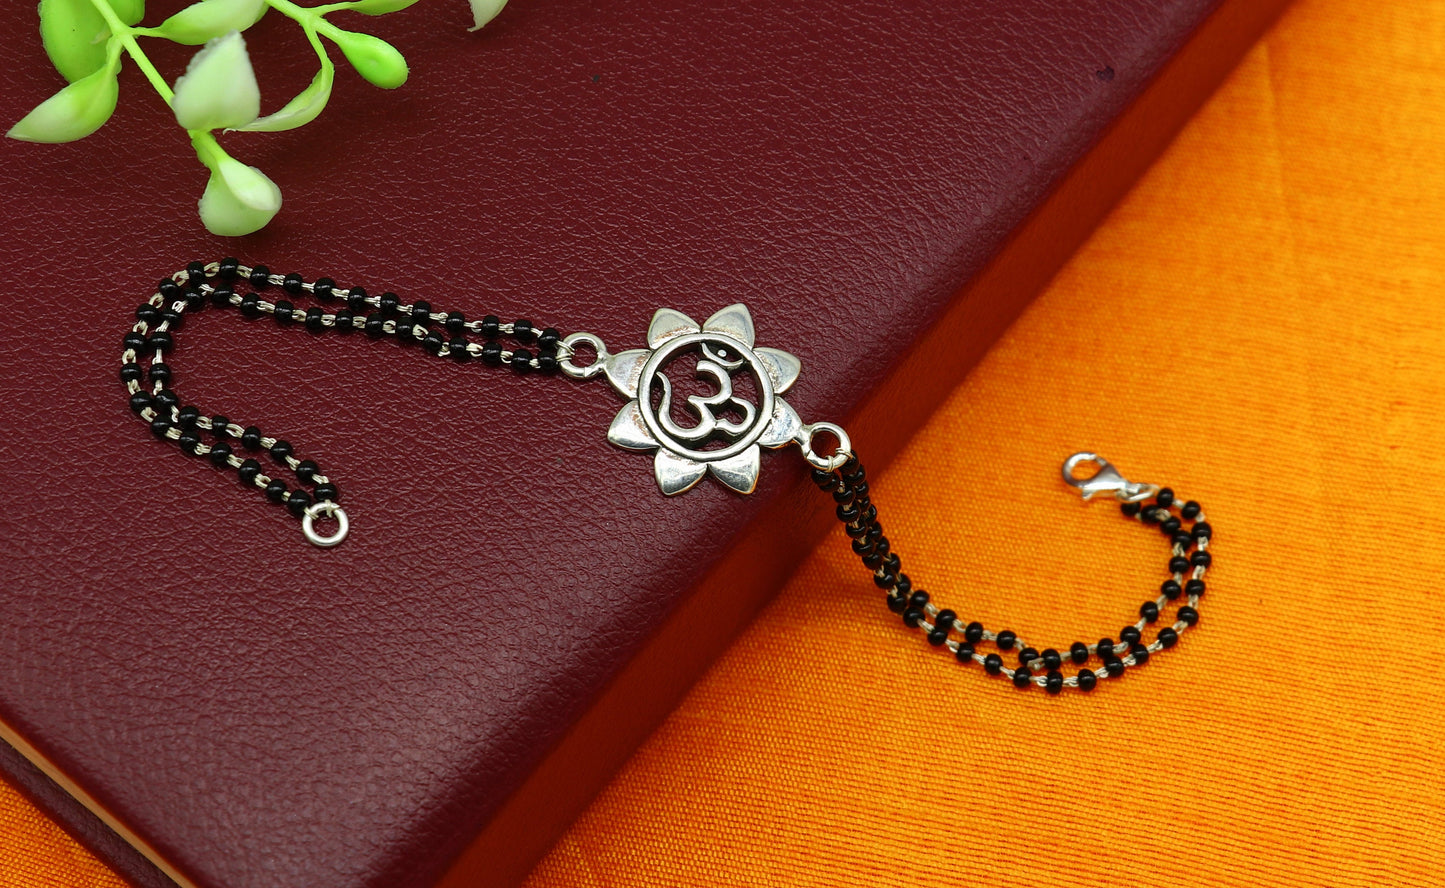 8" 925 Sterling silver customized black beaded 'AUM' Rakhi or bracelet. best gift for your brother's for special personalized gifing rk16 - TRIBAL ORNAMENTS